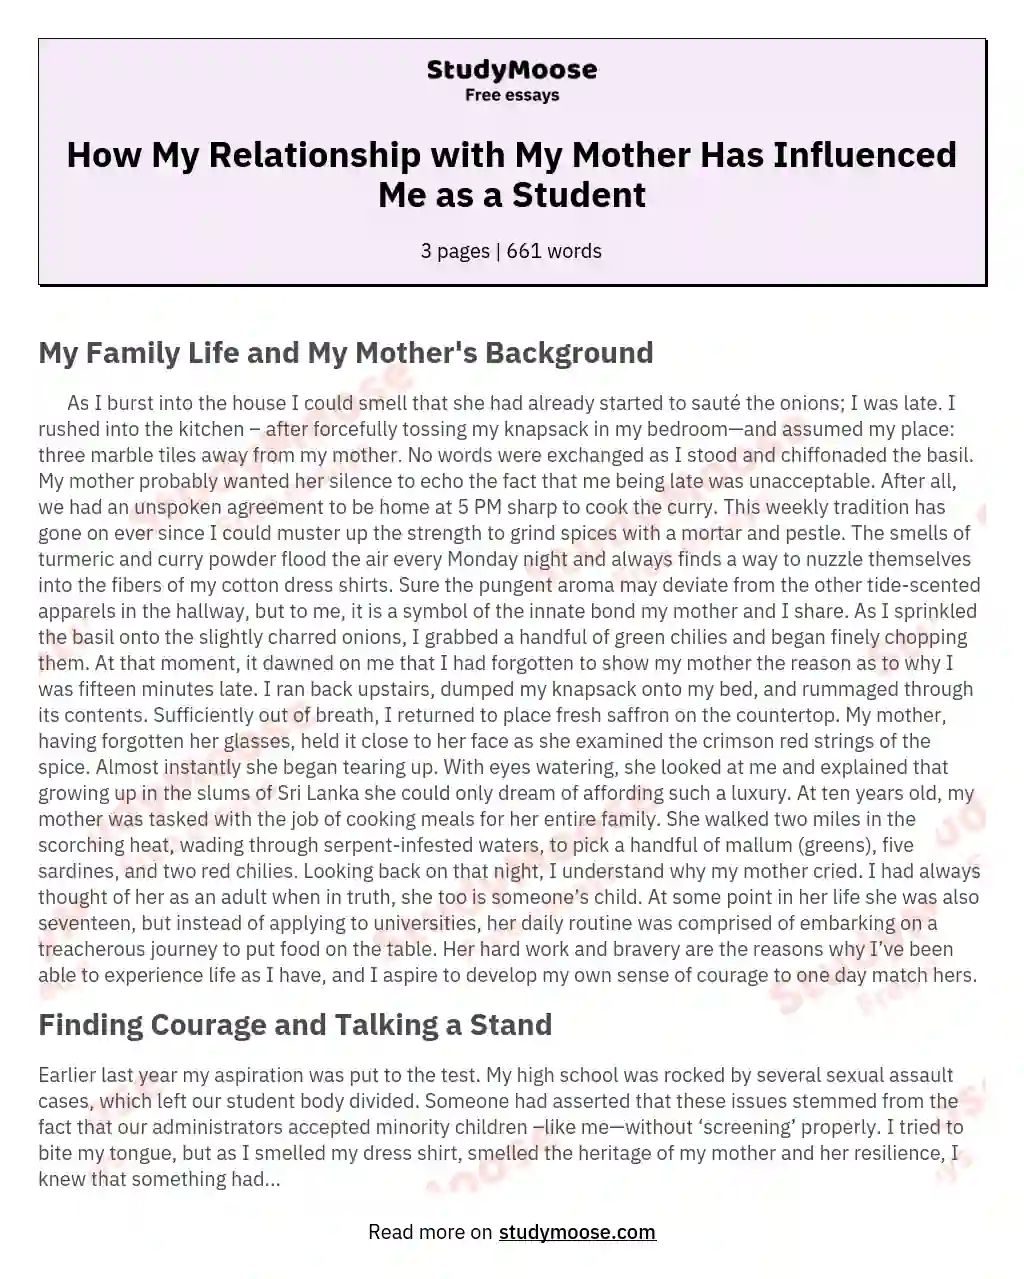 How My Relationship with My Mother Has Influenced Me as a Student essay